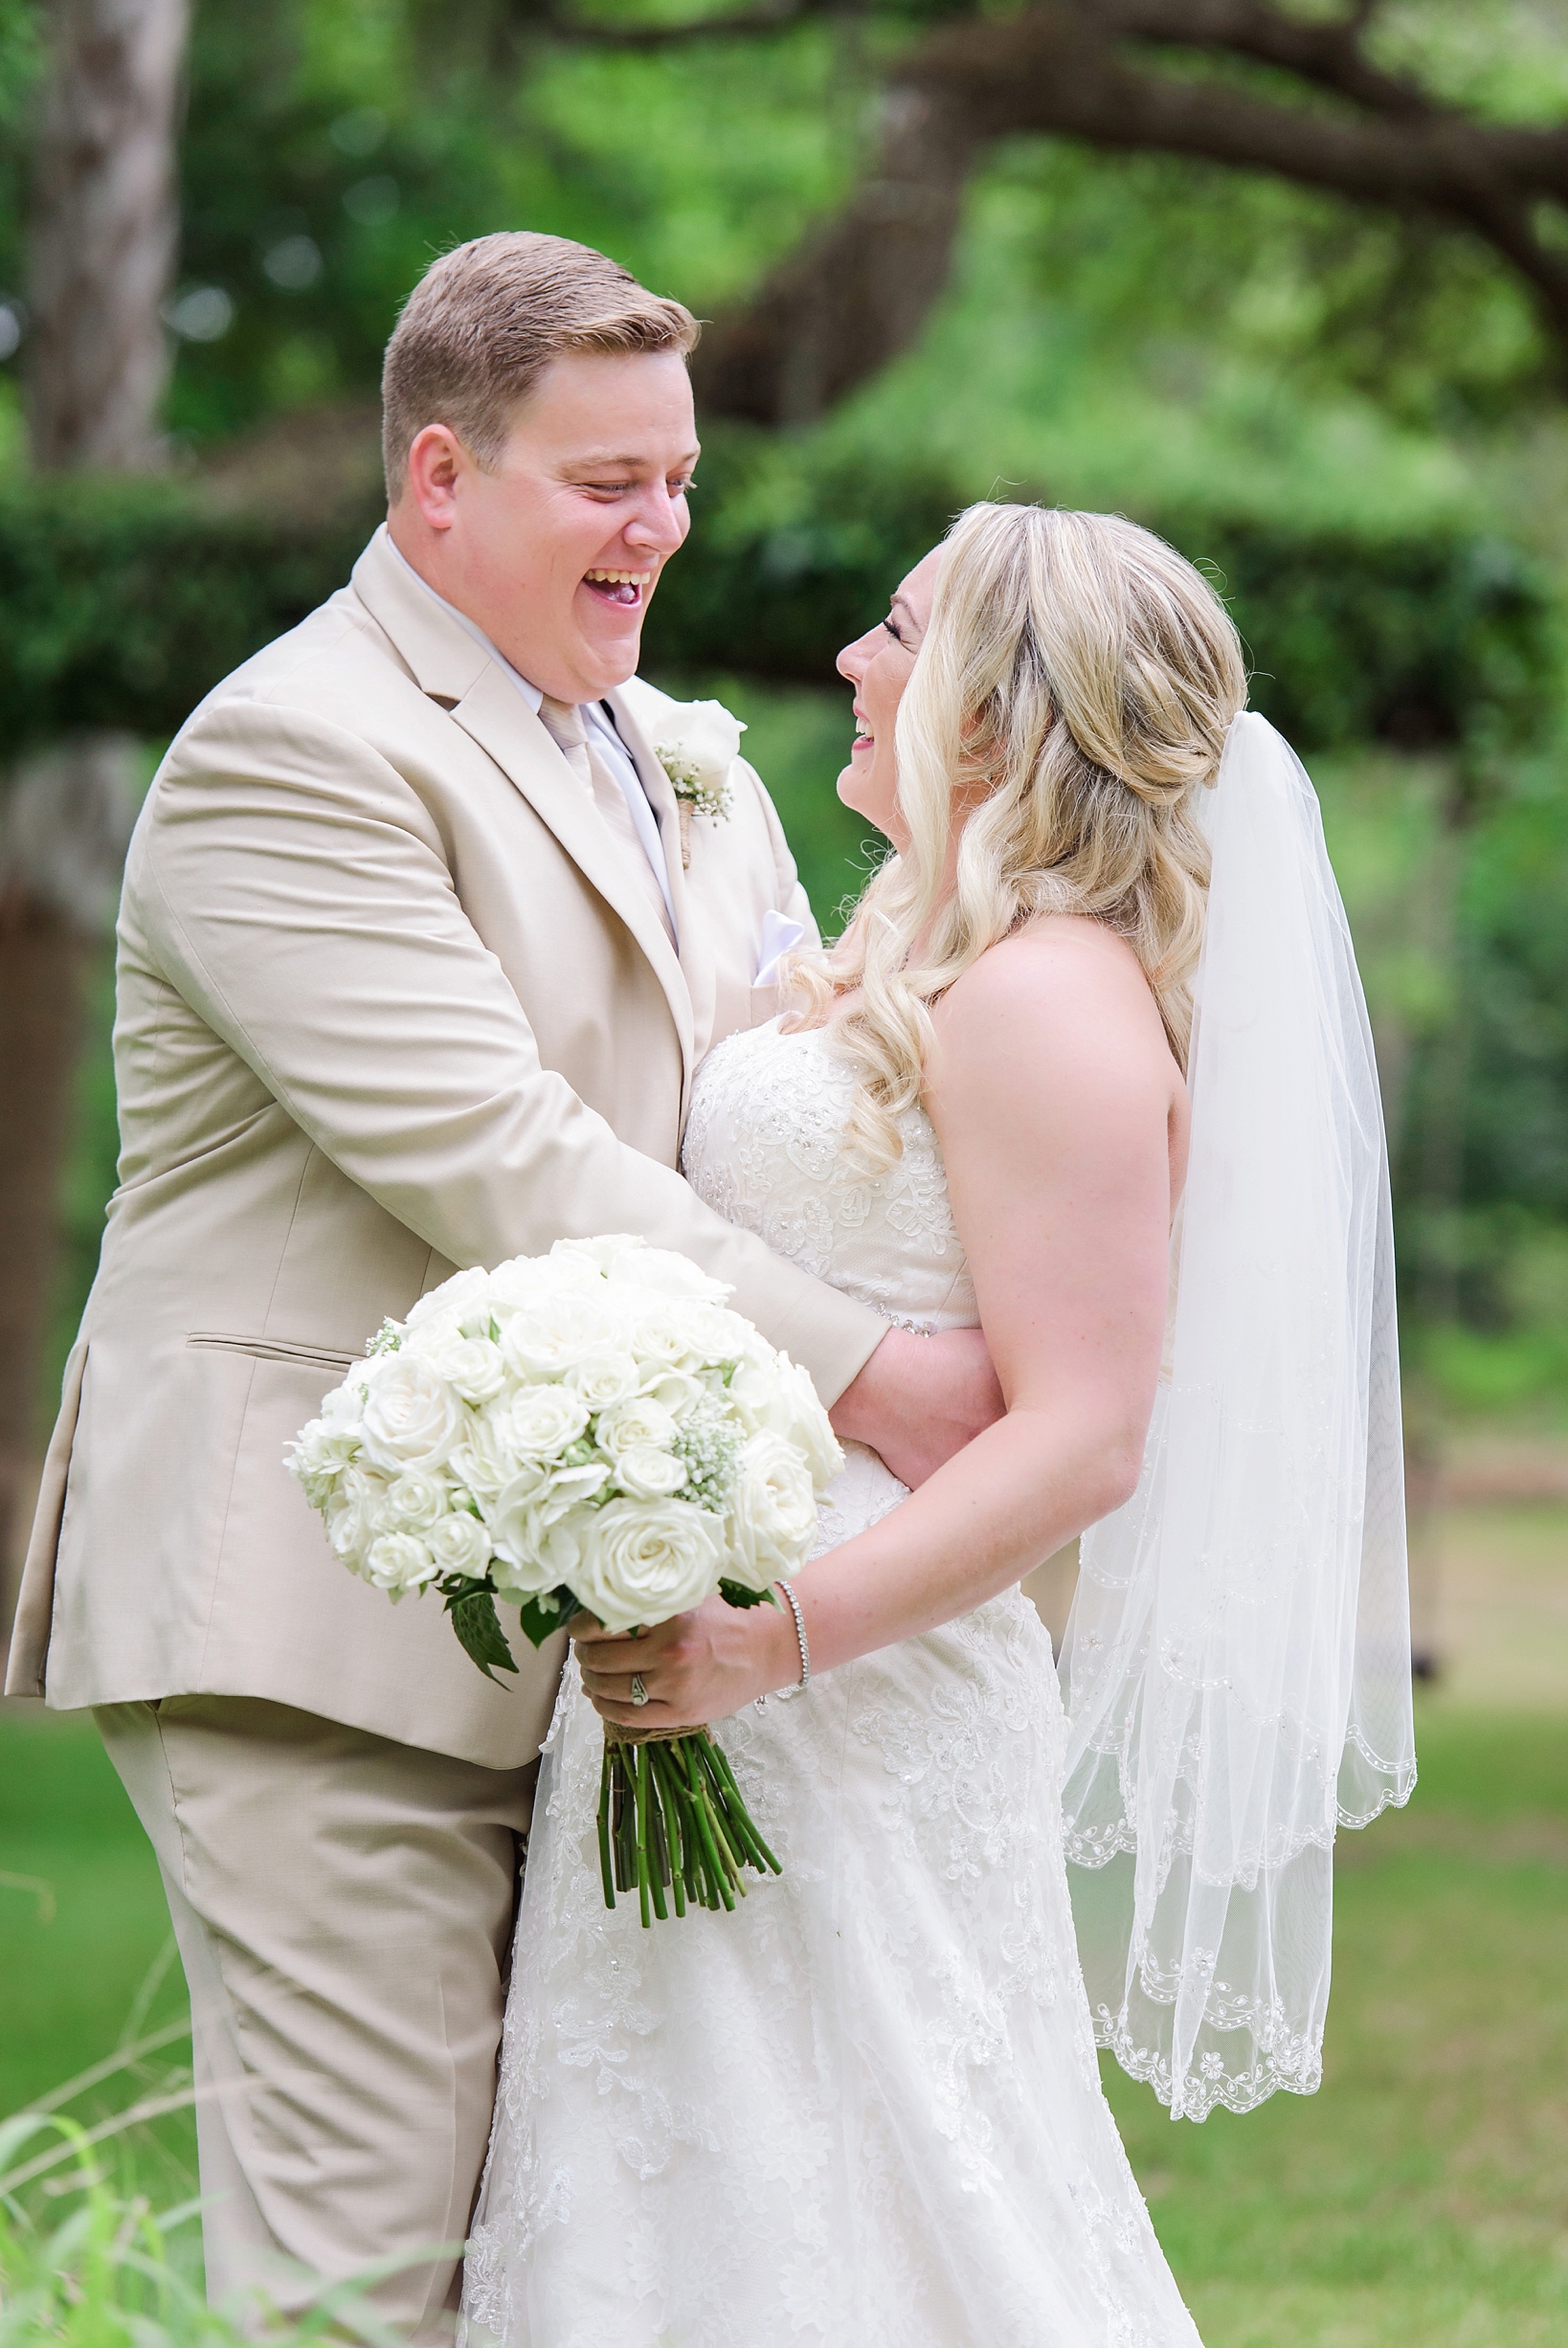 Large white bouquet of roses and the groom laughing during the wedding portraits